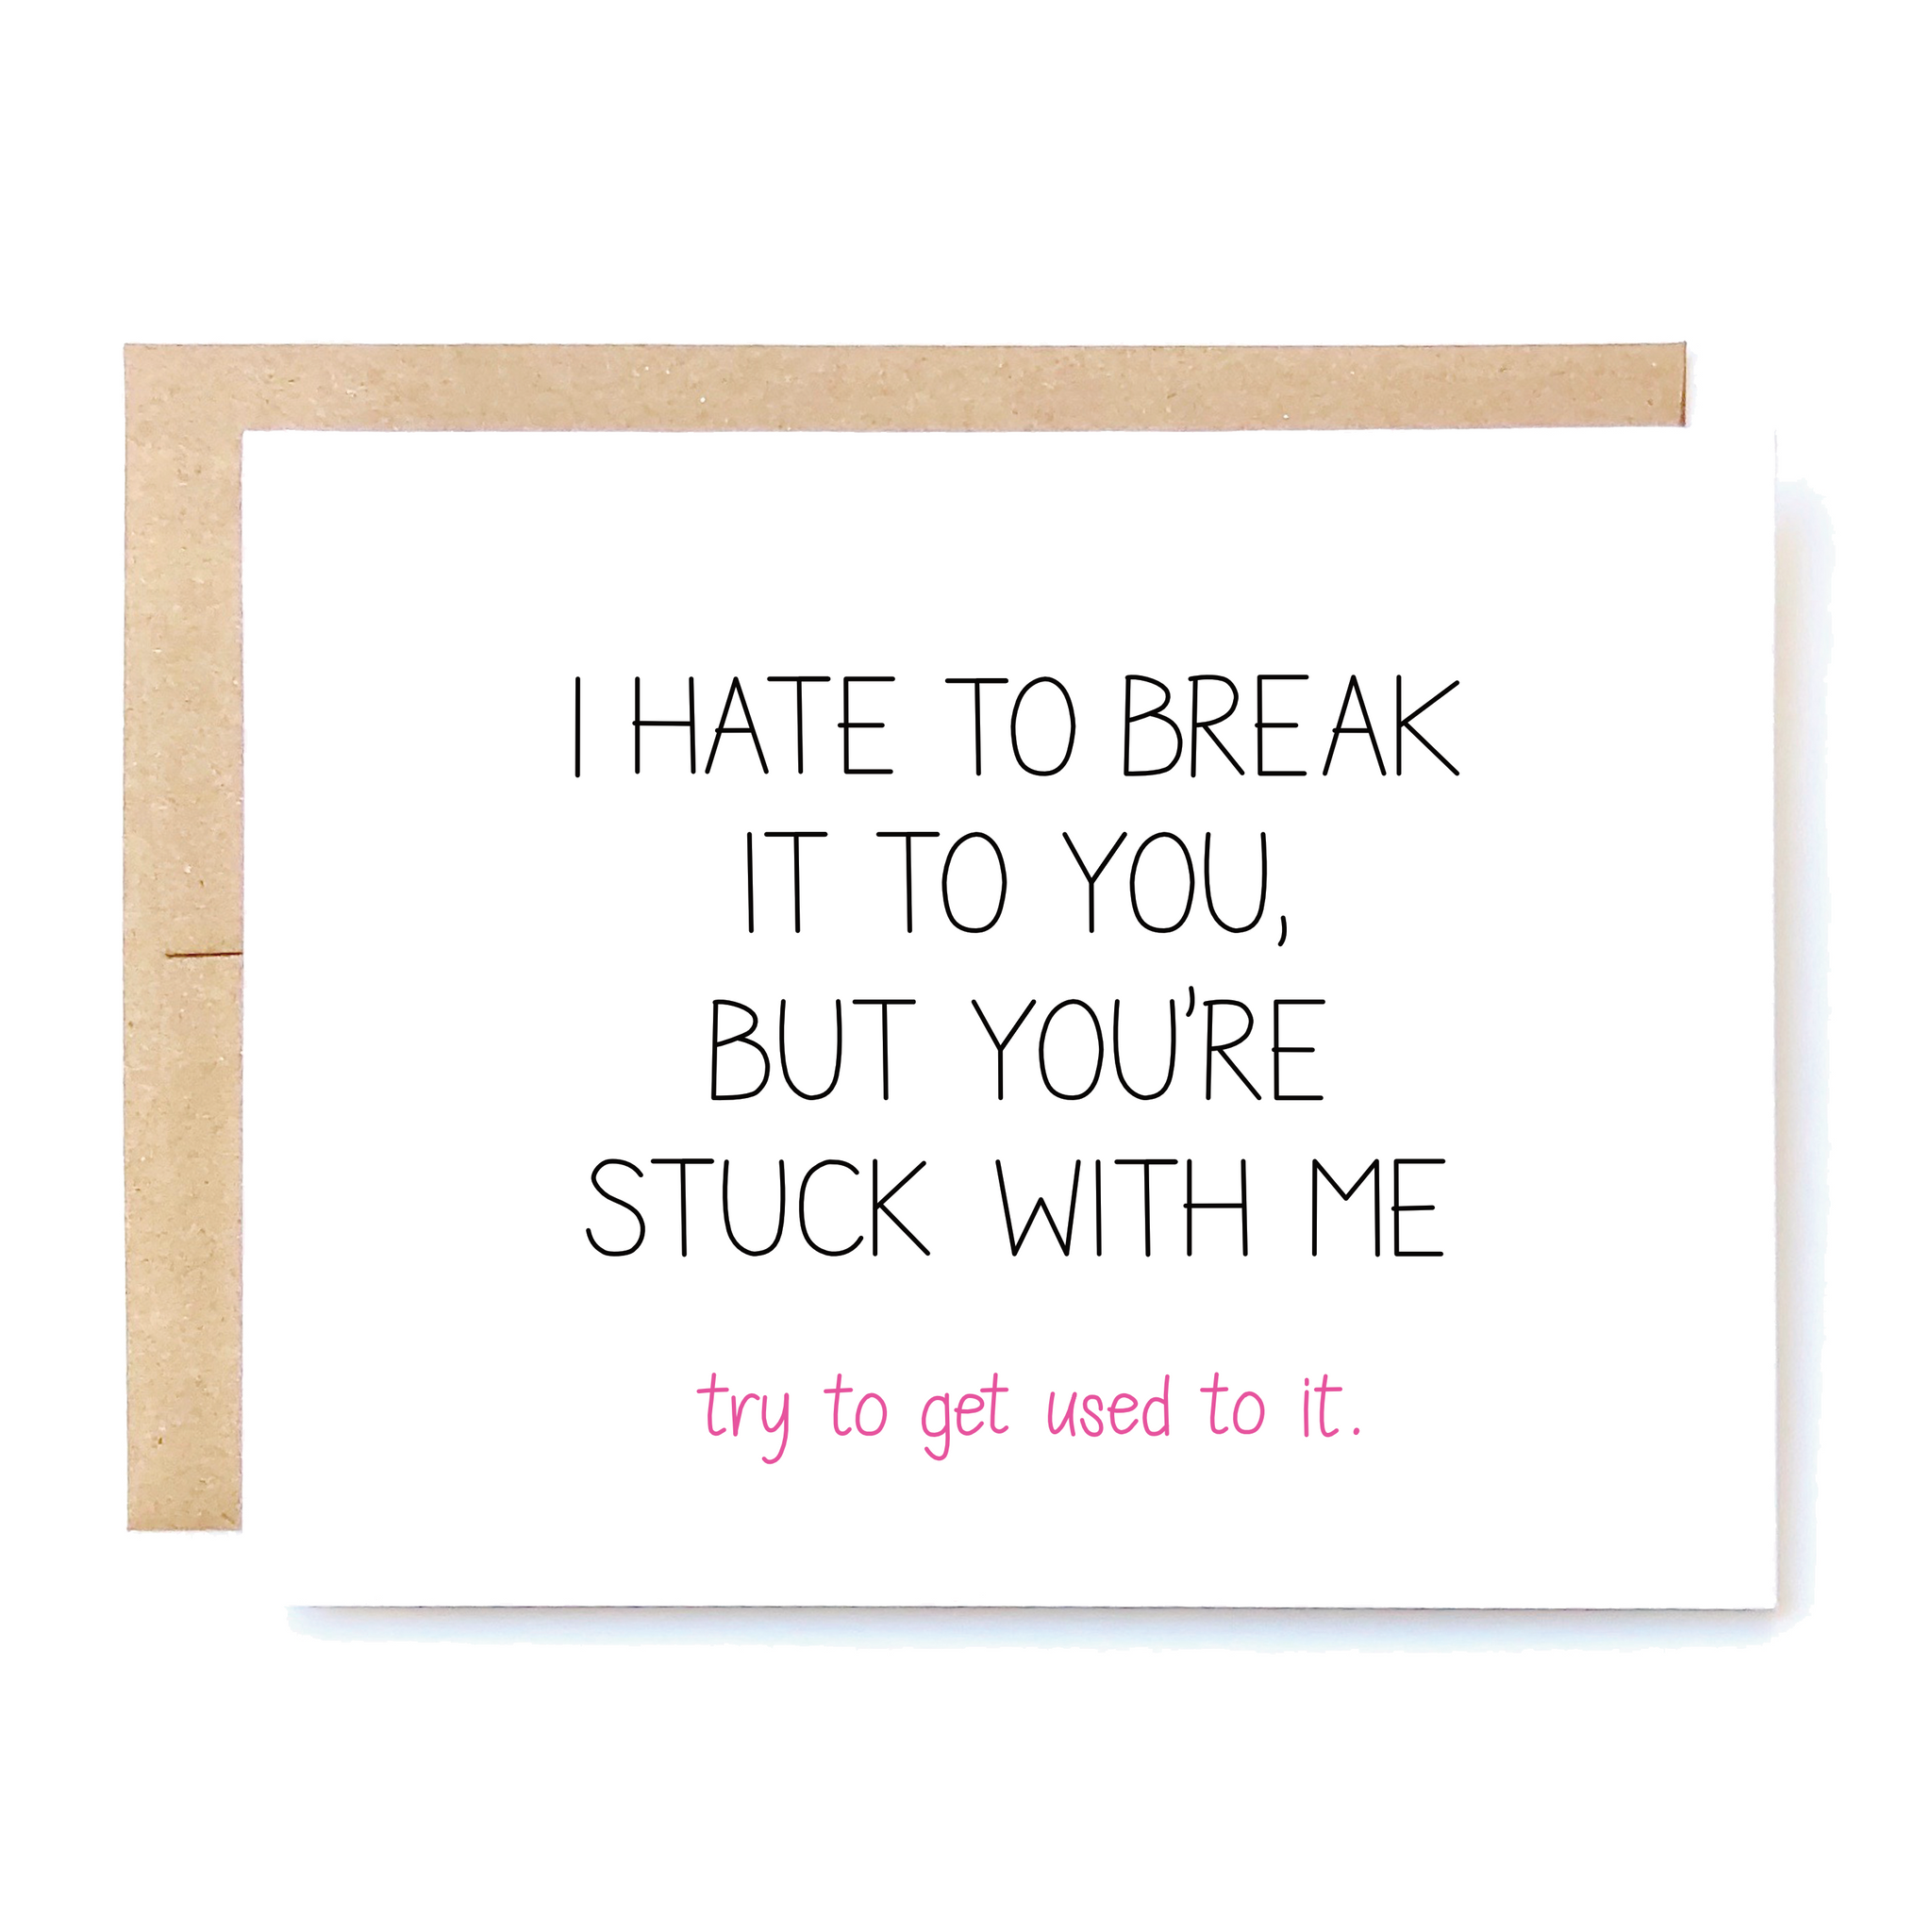 Card Front: I hate to break it to you, but you're stuck with me. Try to get used to it.